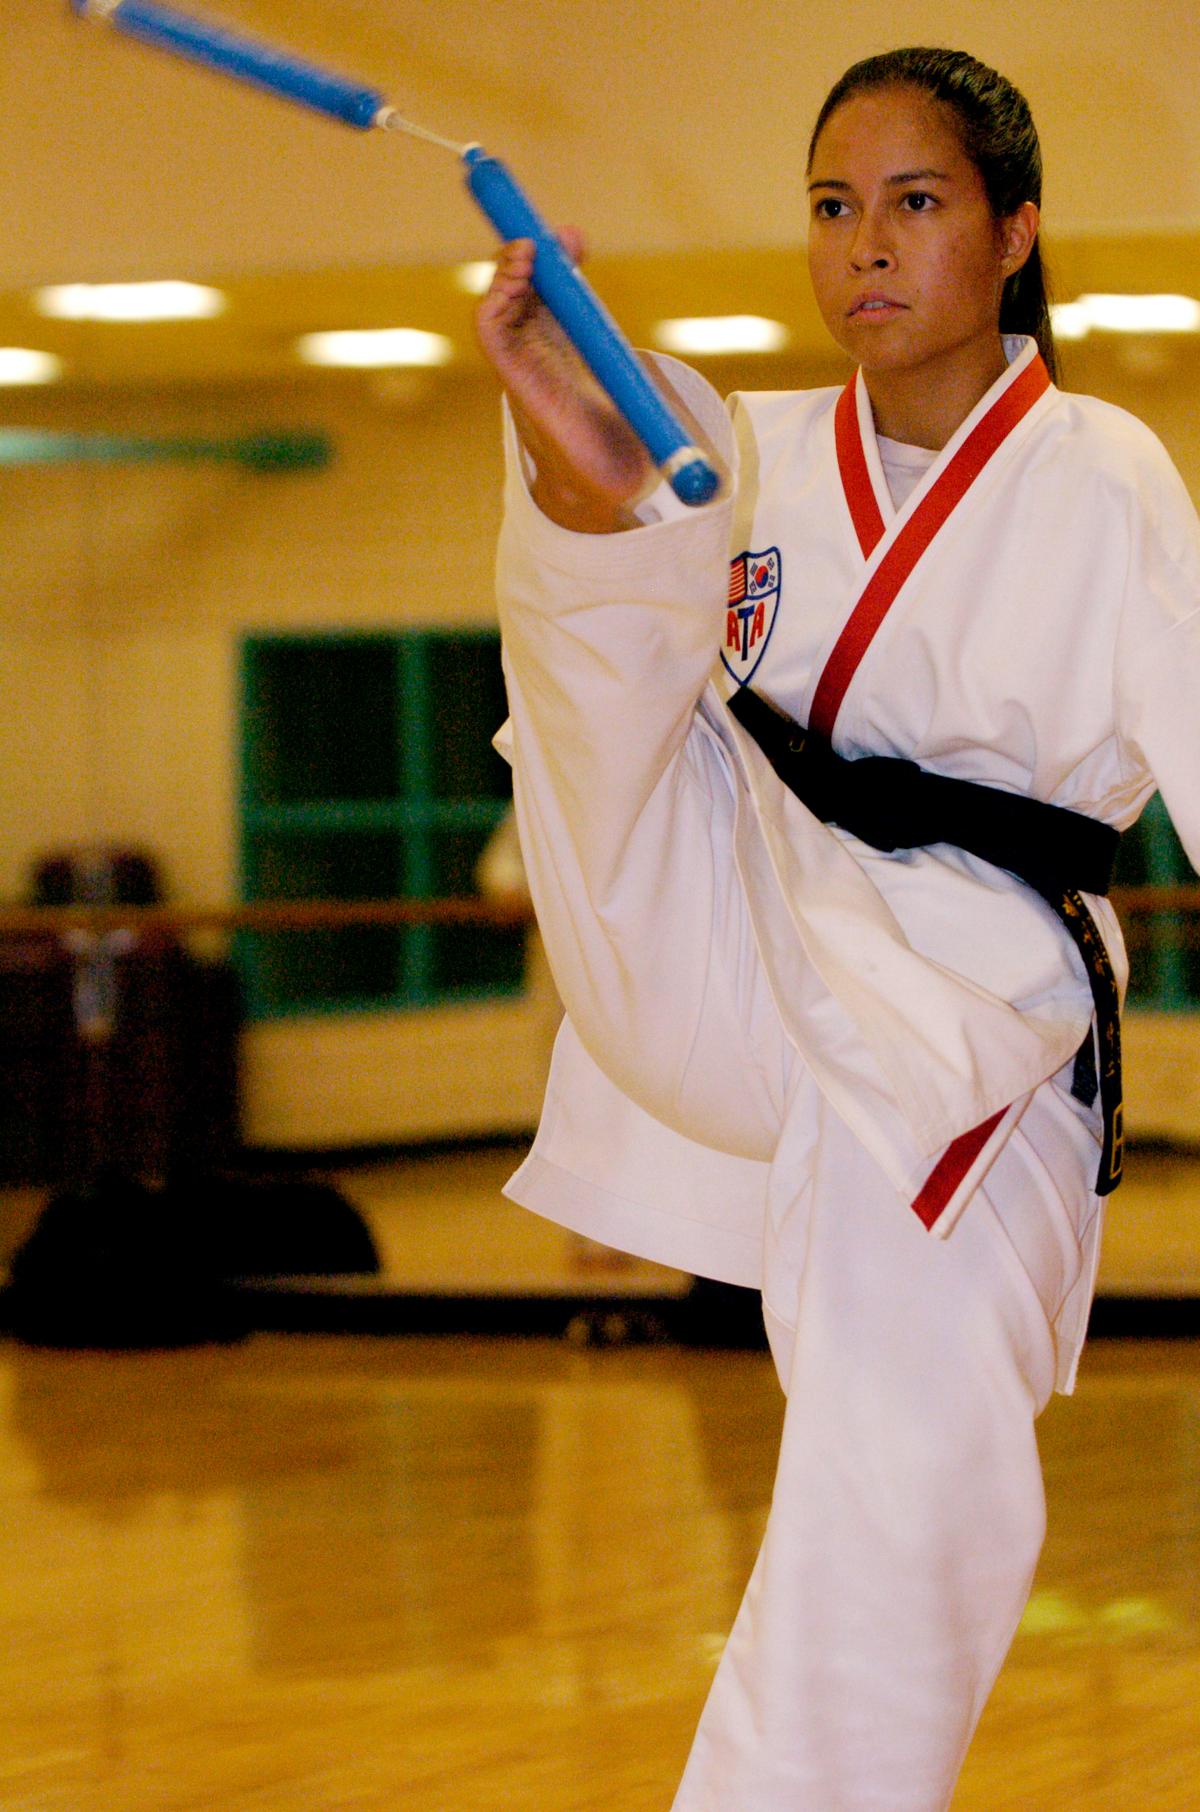 Jessica using nunchucks while practicing Tae Kwon Do (Courtesy of <a href="https://www.jessicacox.com/">Jessica Cox</a>)